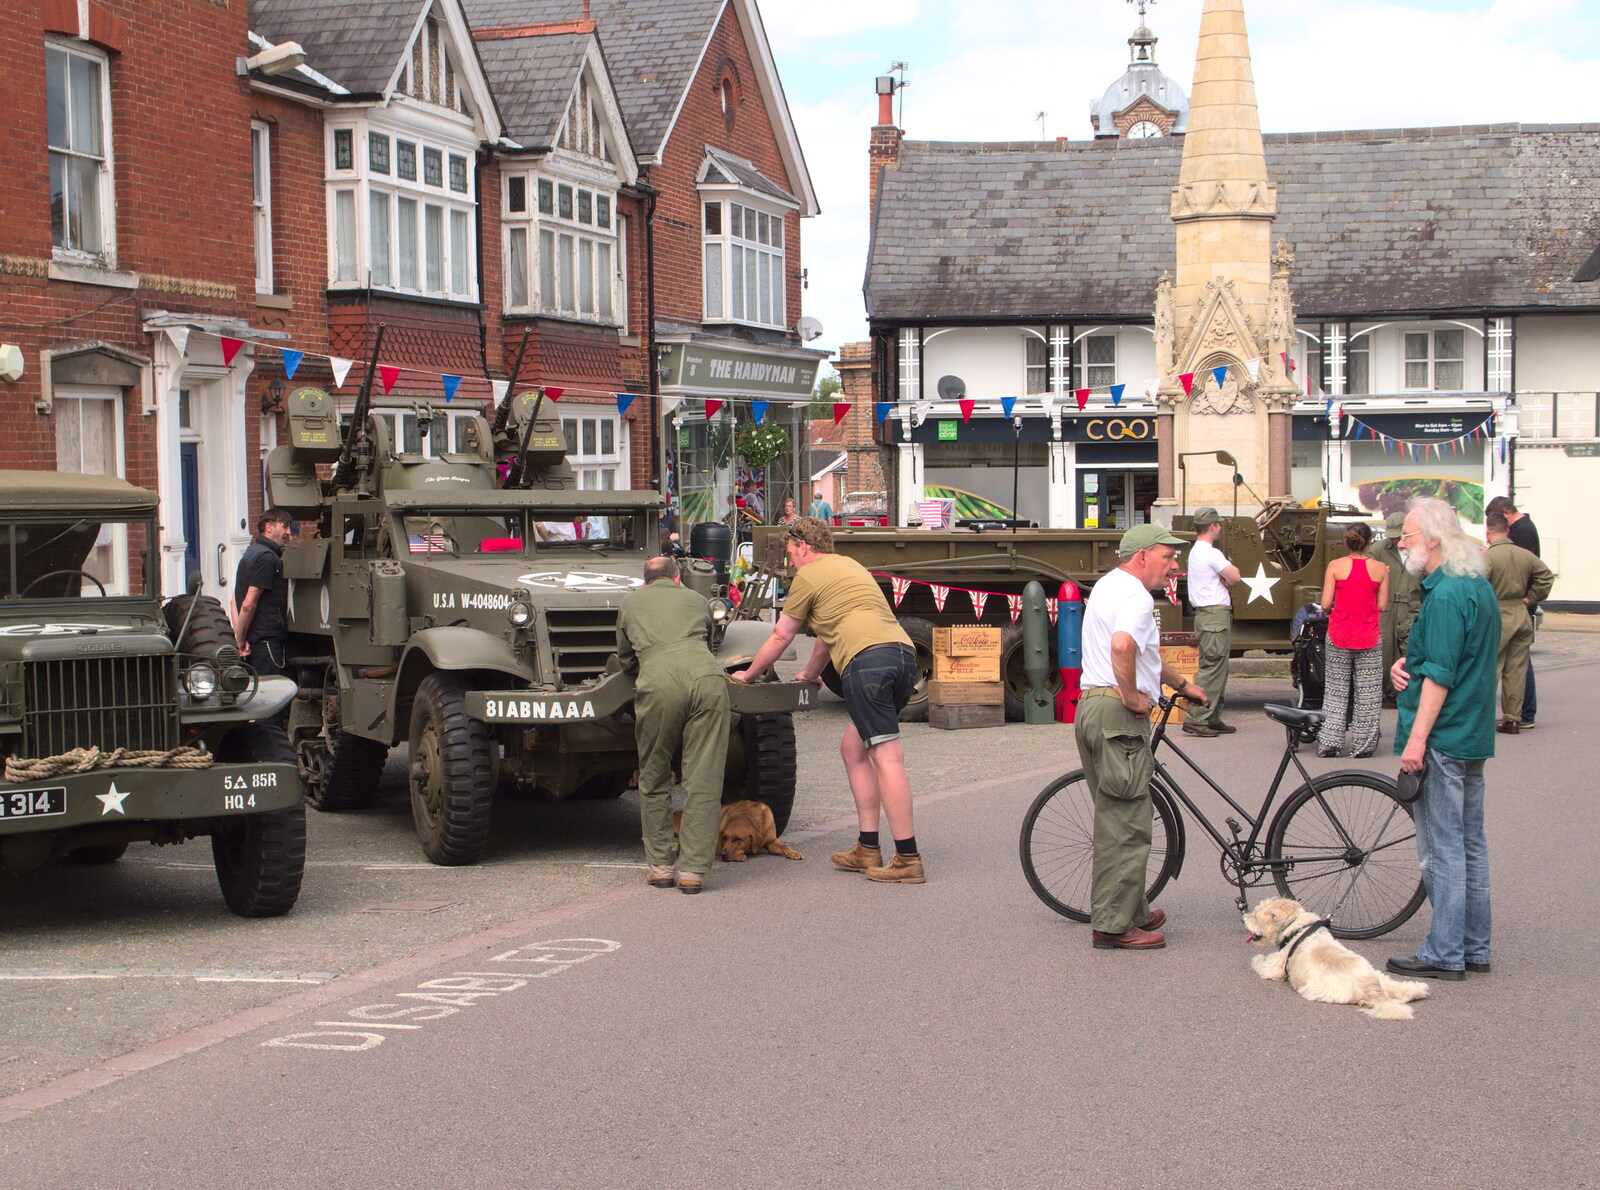 Military vehicles on the market place in Eye from A 1940's Takeover, Eye, Suffolk - 8th August 2015